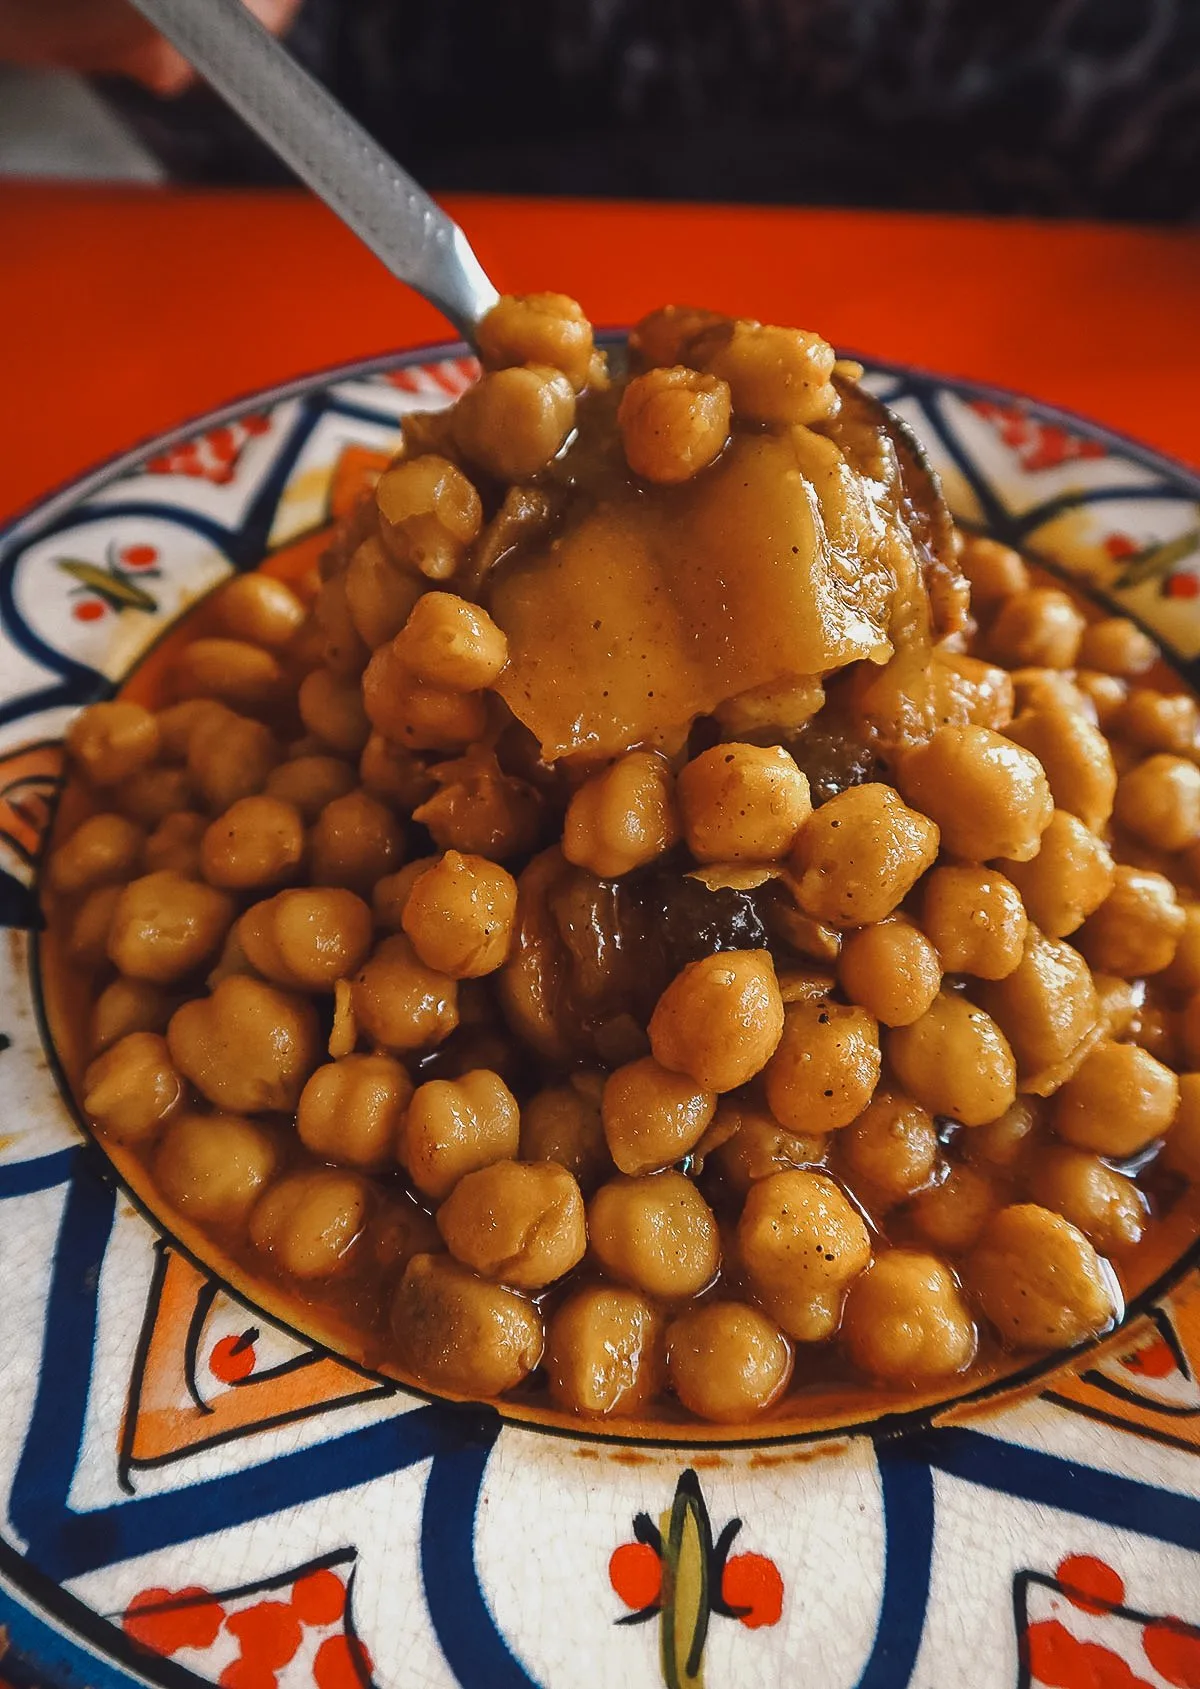 Chickpeas and beef hock at a restaurant in Rabat